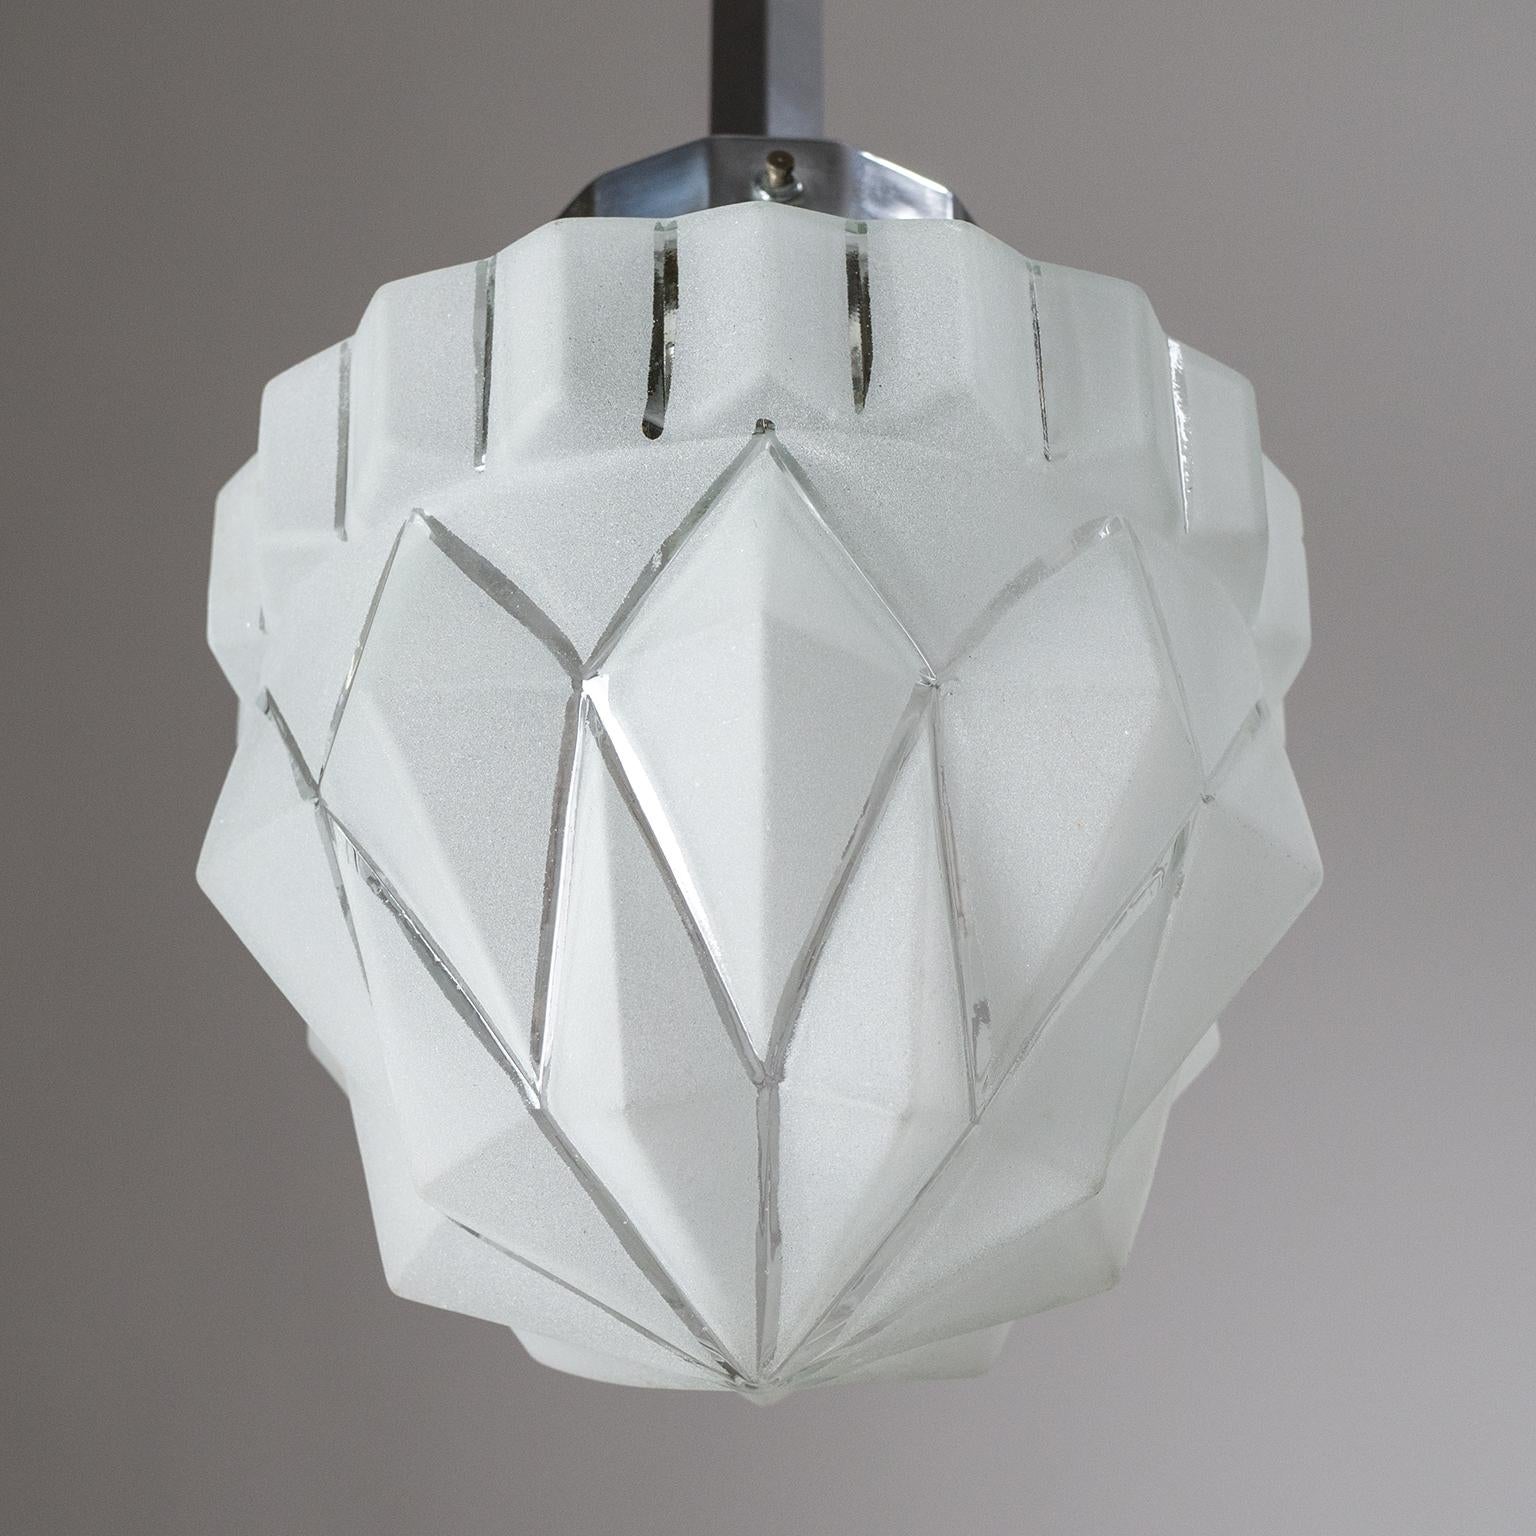 1920s French Art Deco Ceiling Light, Chrome and Frosted Glass 3